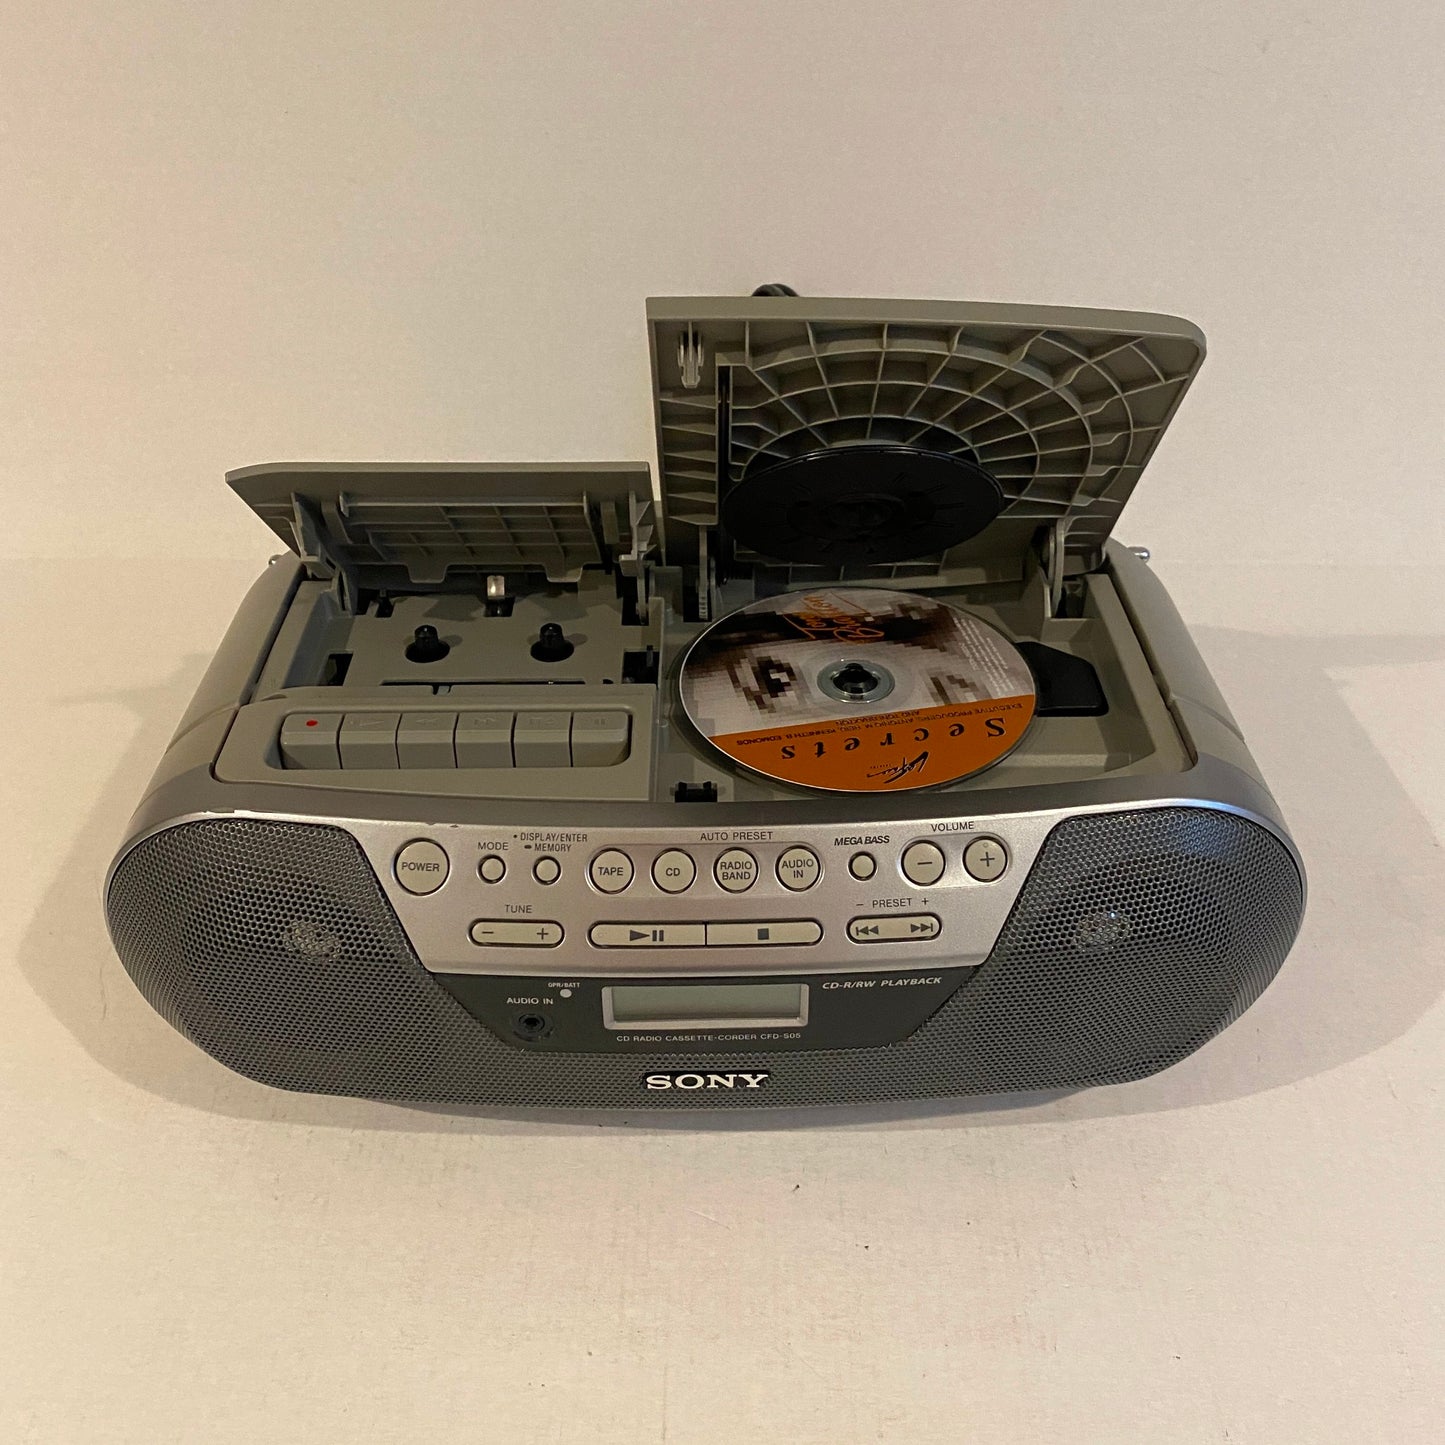 Sony Cassette Radio CD Player - CFD-S05